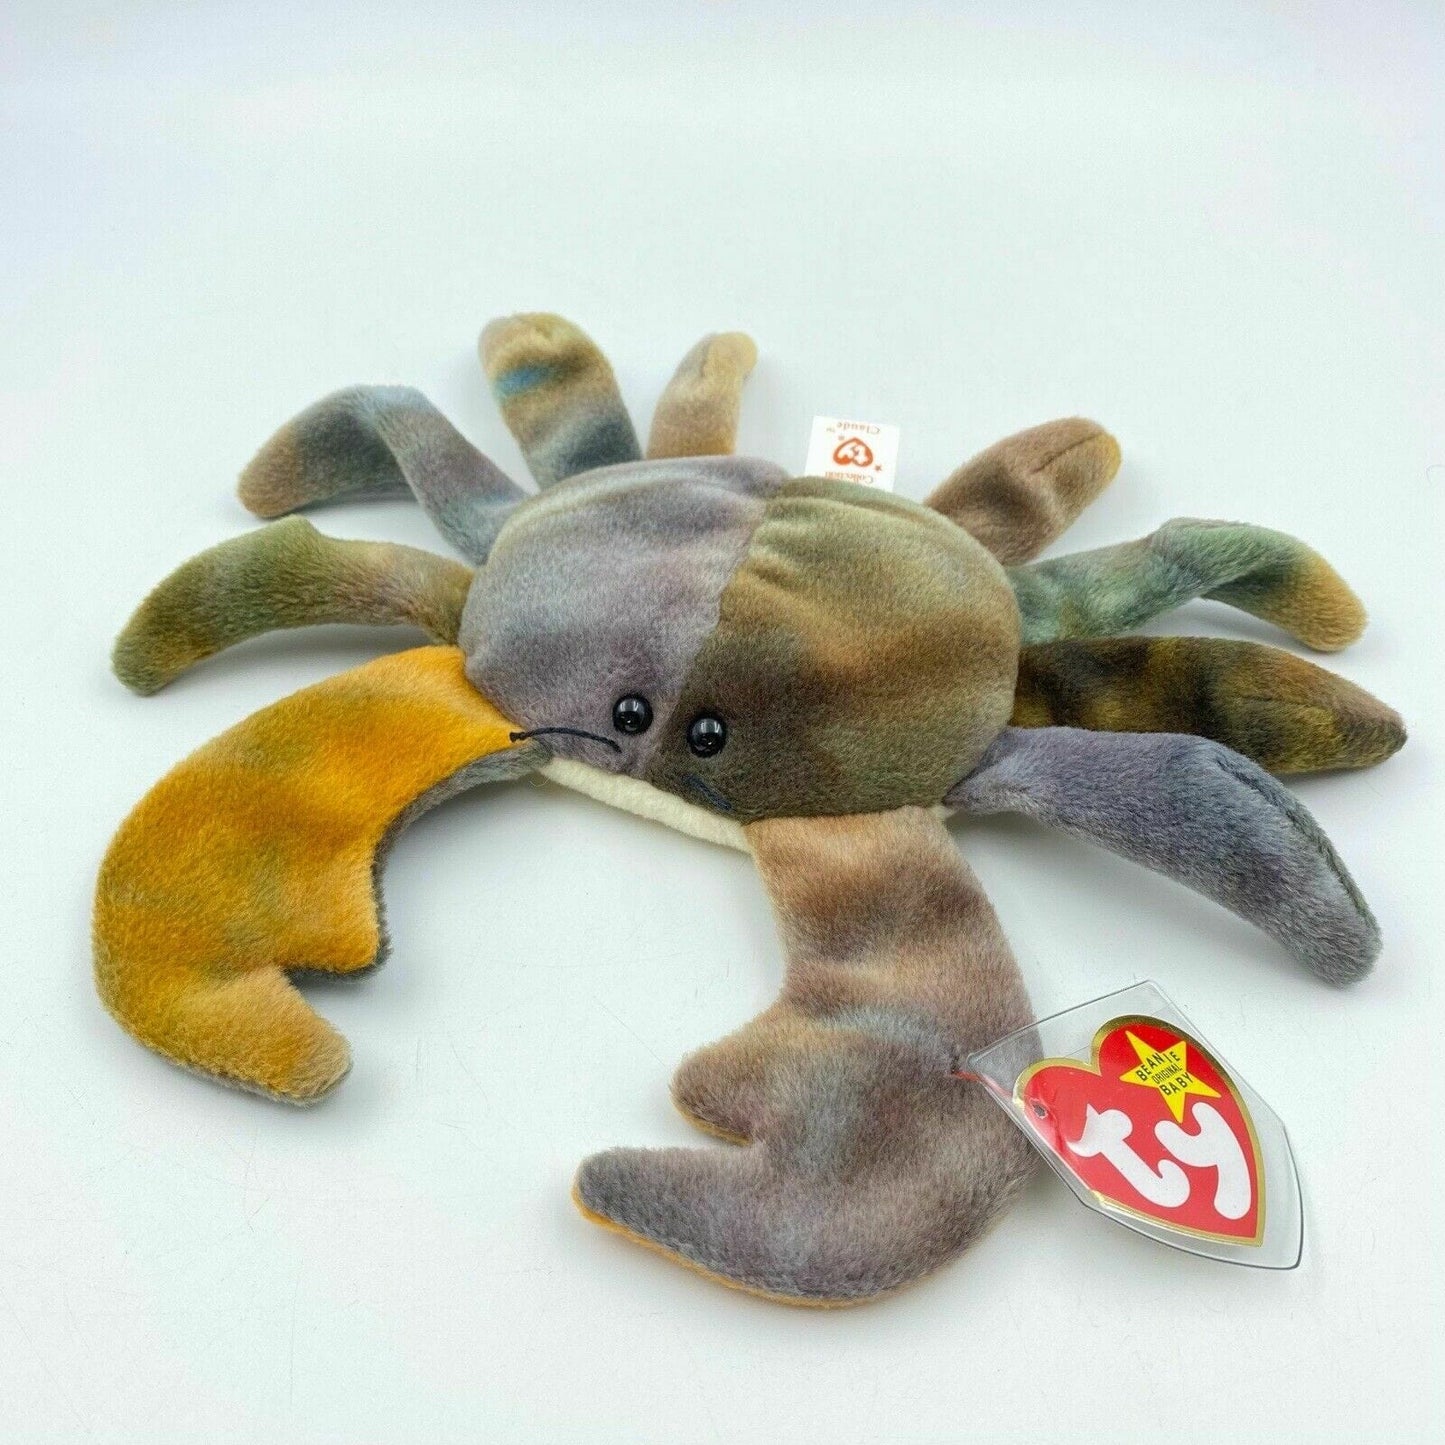 Ty Original Beanie Babies Claude The Crab 1996 Excellent Cond. w/ Errors 4083